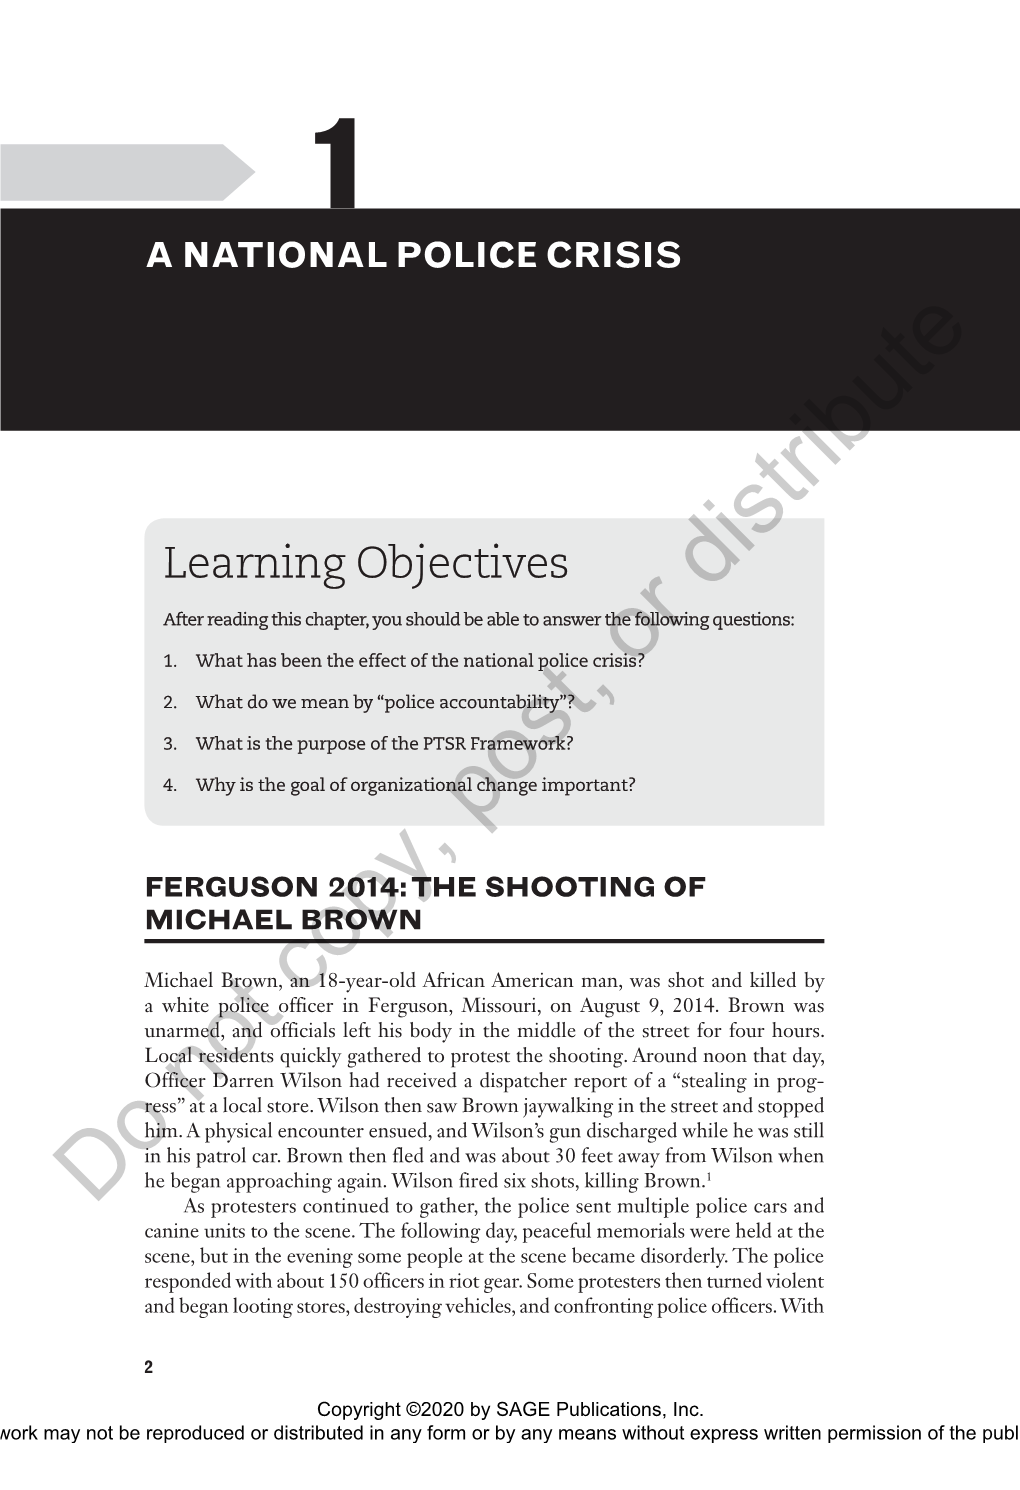 Chapter 1: a National Police Crisis